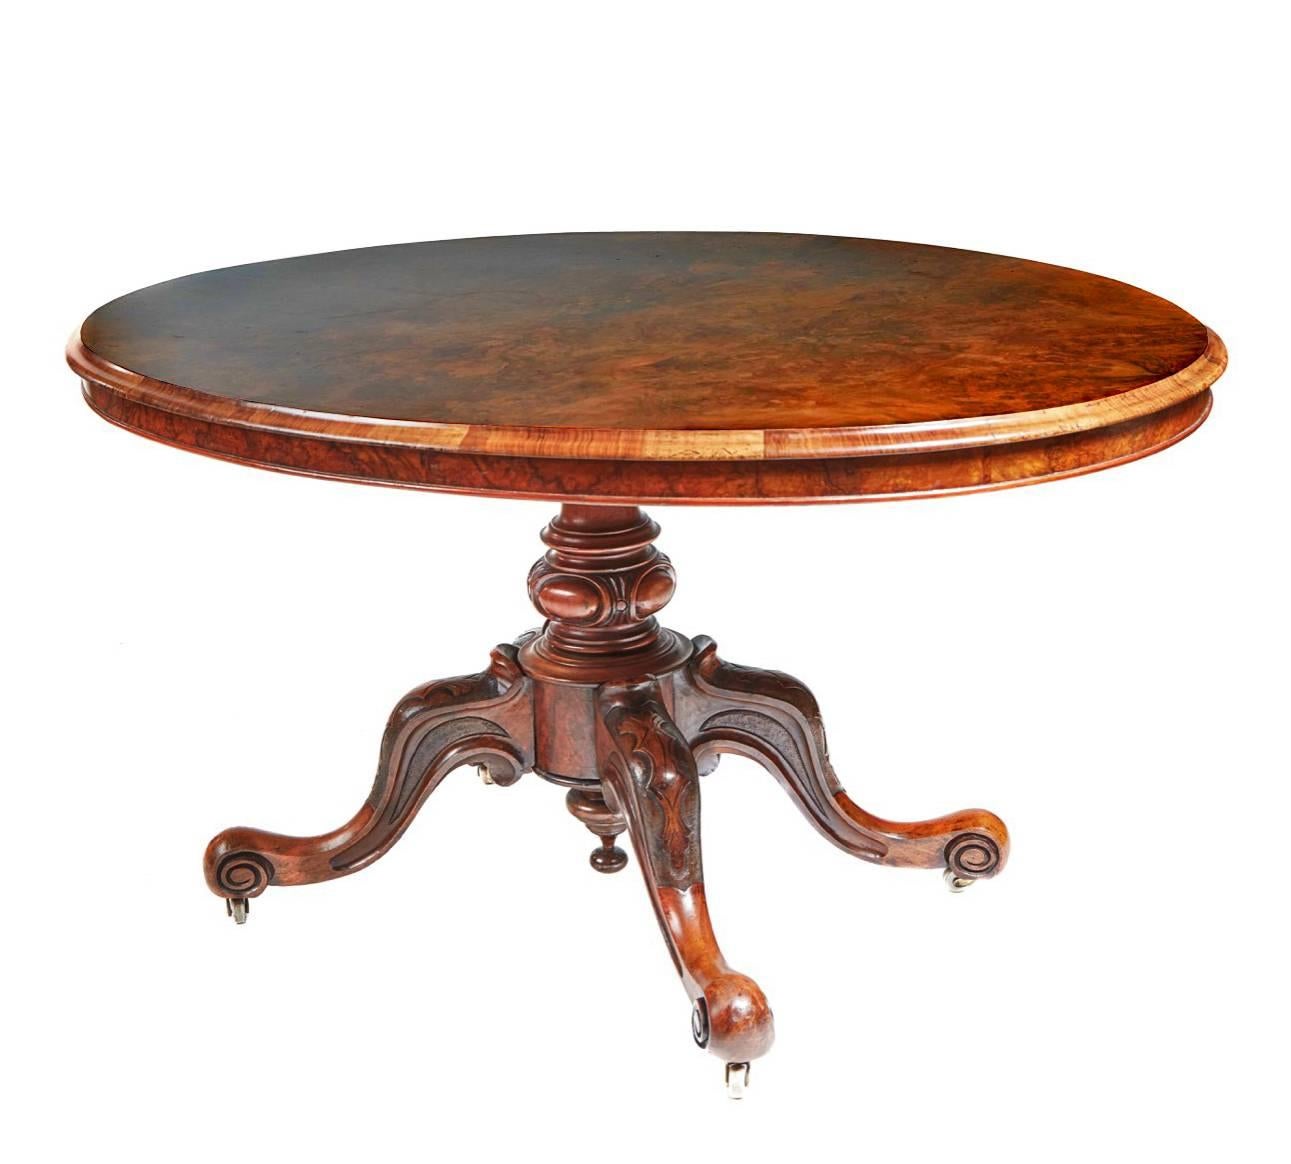 Good quality Victorian oval burr walnut centre table, the top having fantastic matched burr walnut veneers with a thumb moulded edge, the base having a carved centre column supported on four carved cabriole legs with original caster.
Fantastic